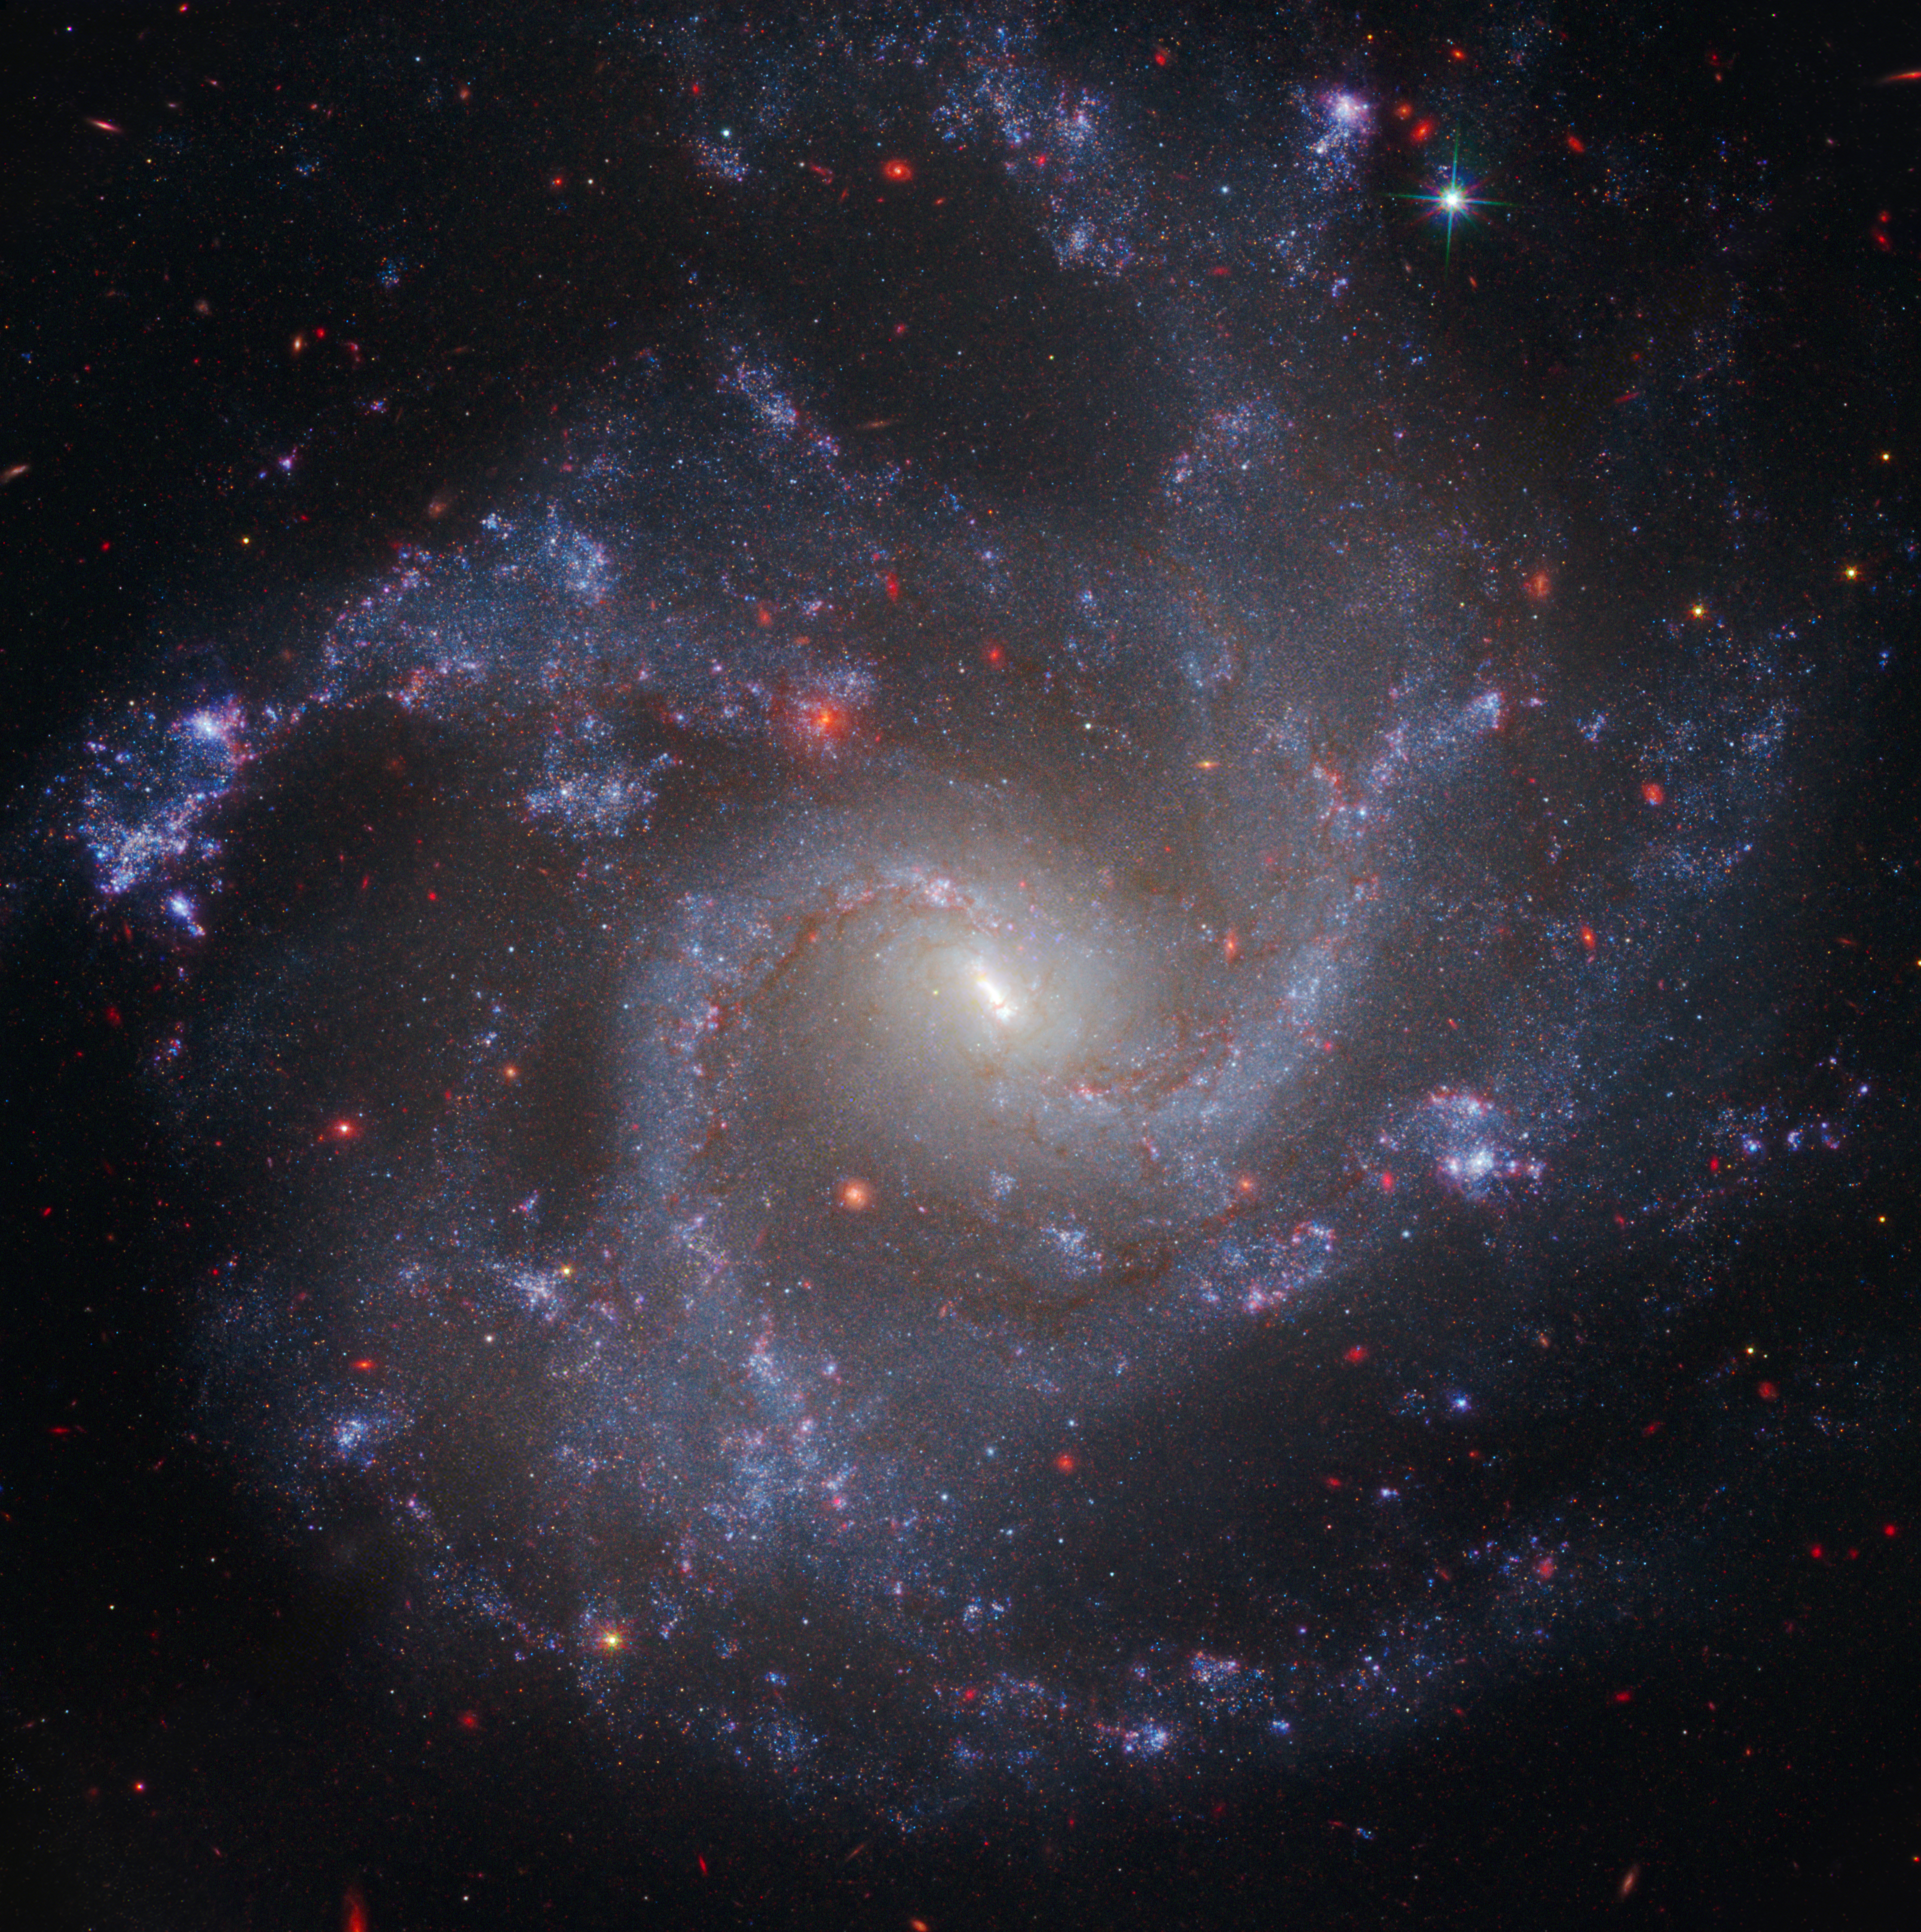 A spiral galaxy with a small bar of bright-white stars at its core. Two main spiral arms extend outward from each end of the bar. They appear to fork into multiple branches beyond the galaxy's core. The spiral arms have a lavender hue. Bright-white and bright-red stars dot the galaxy. Reddish-brown dust lanes line the inner curves of the spiral arms.